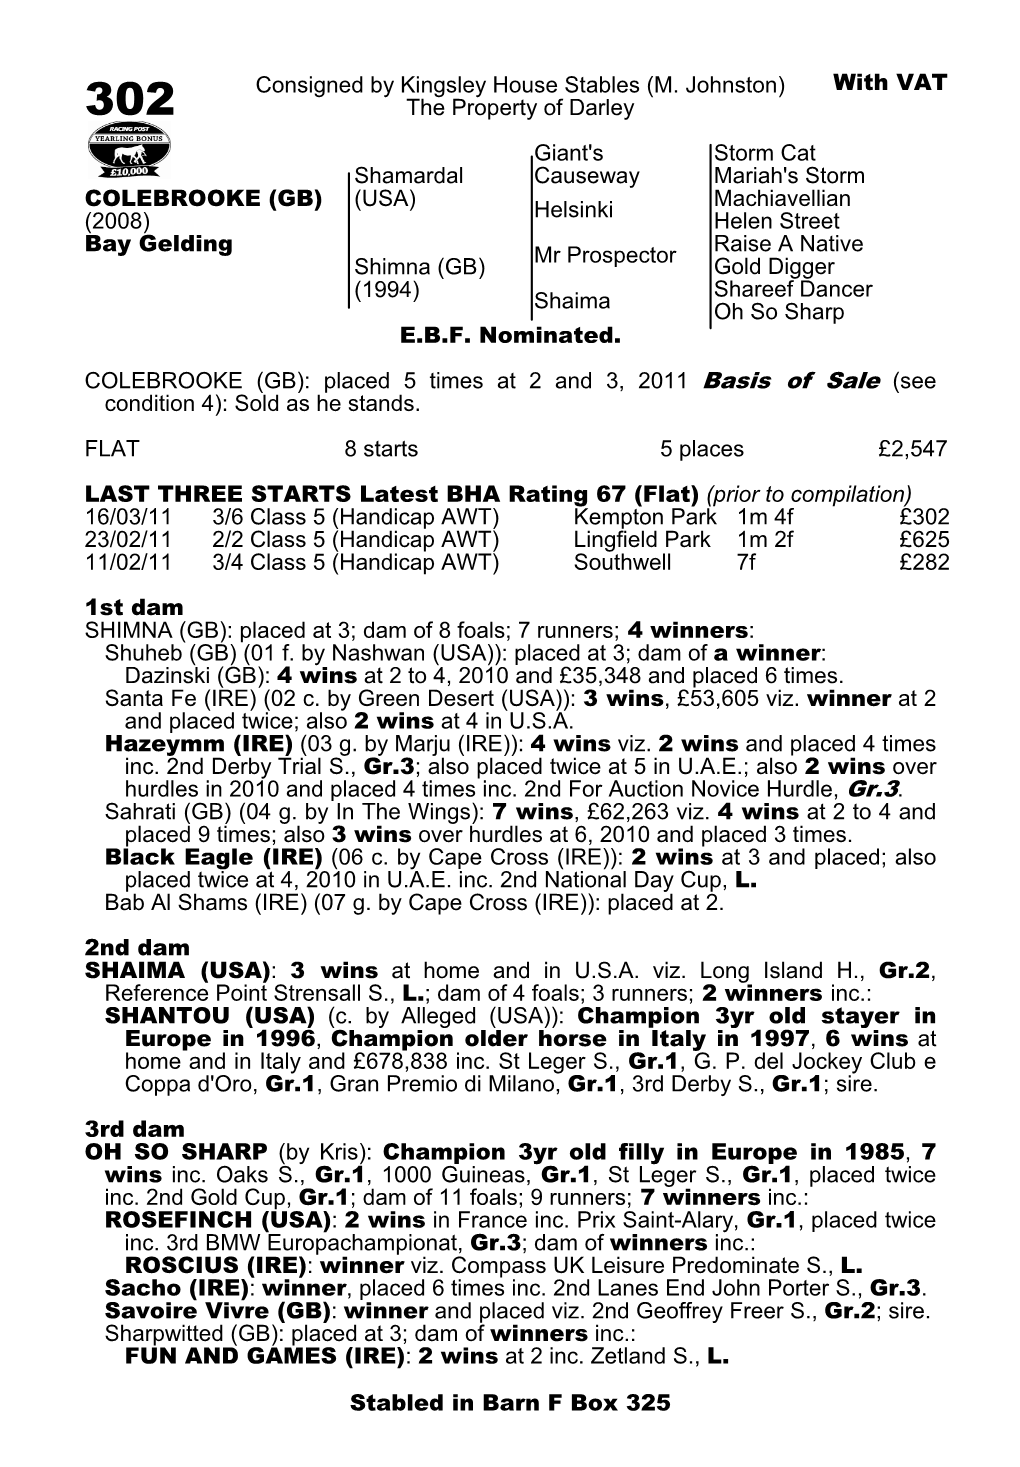 302 Consigned by Kingsley House Stables (M. Johnston)